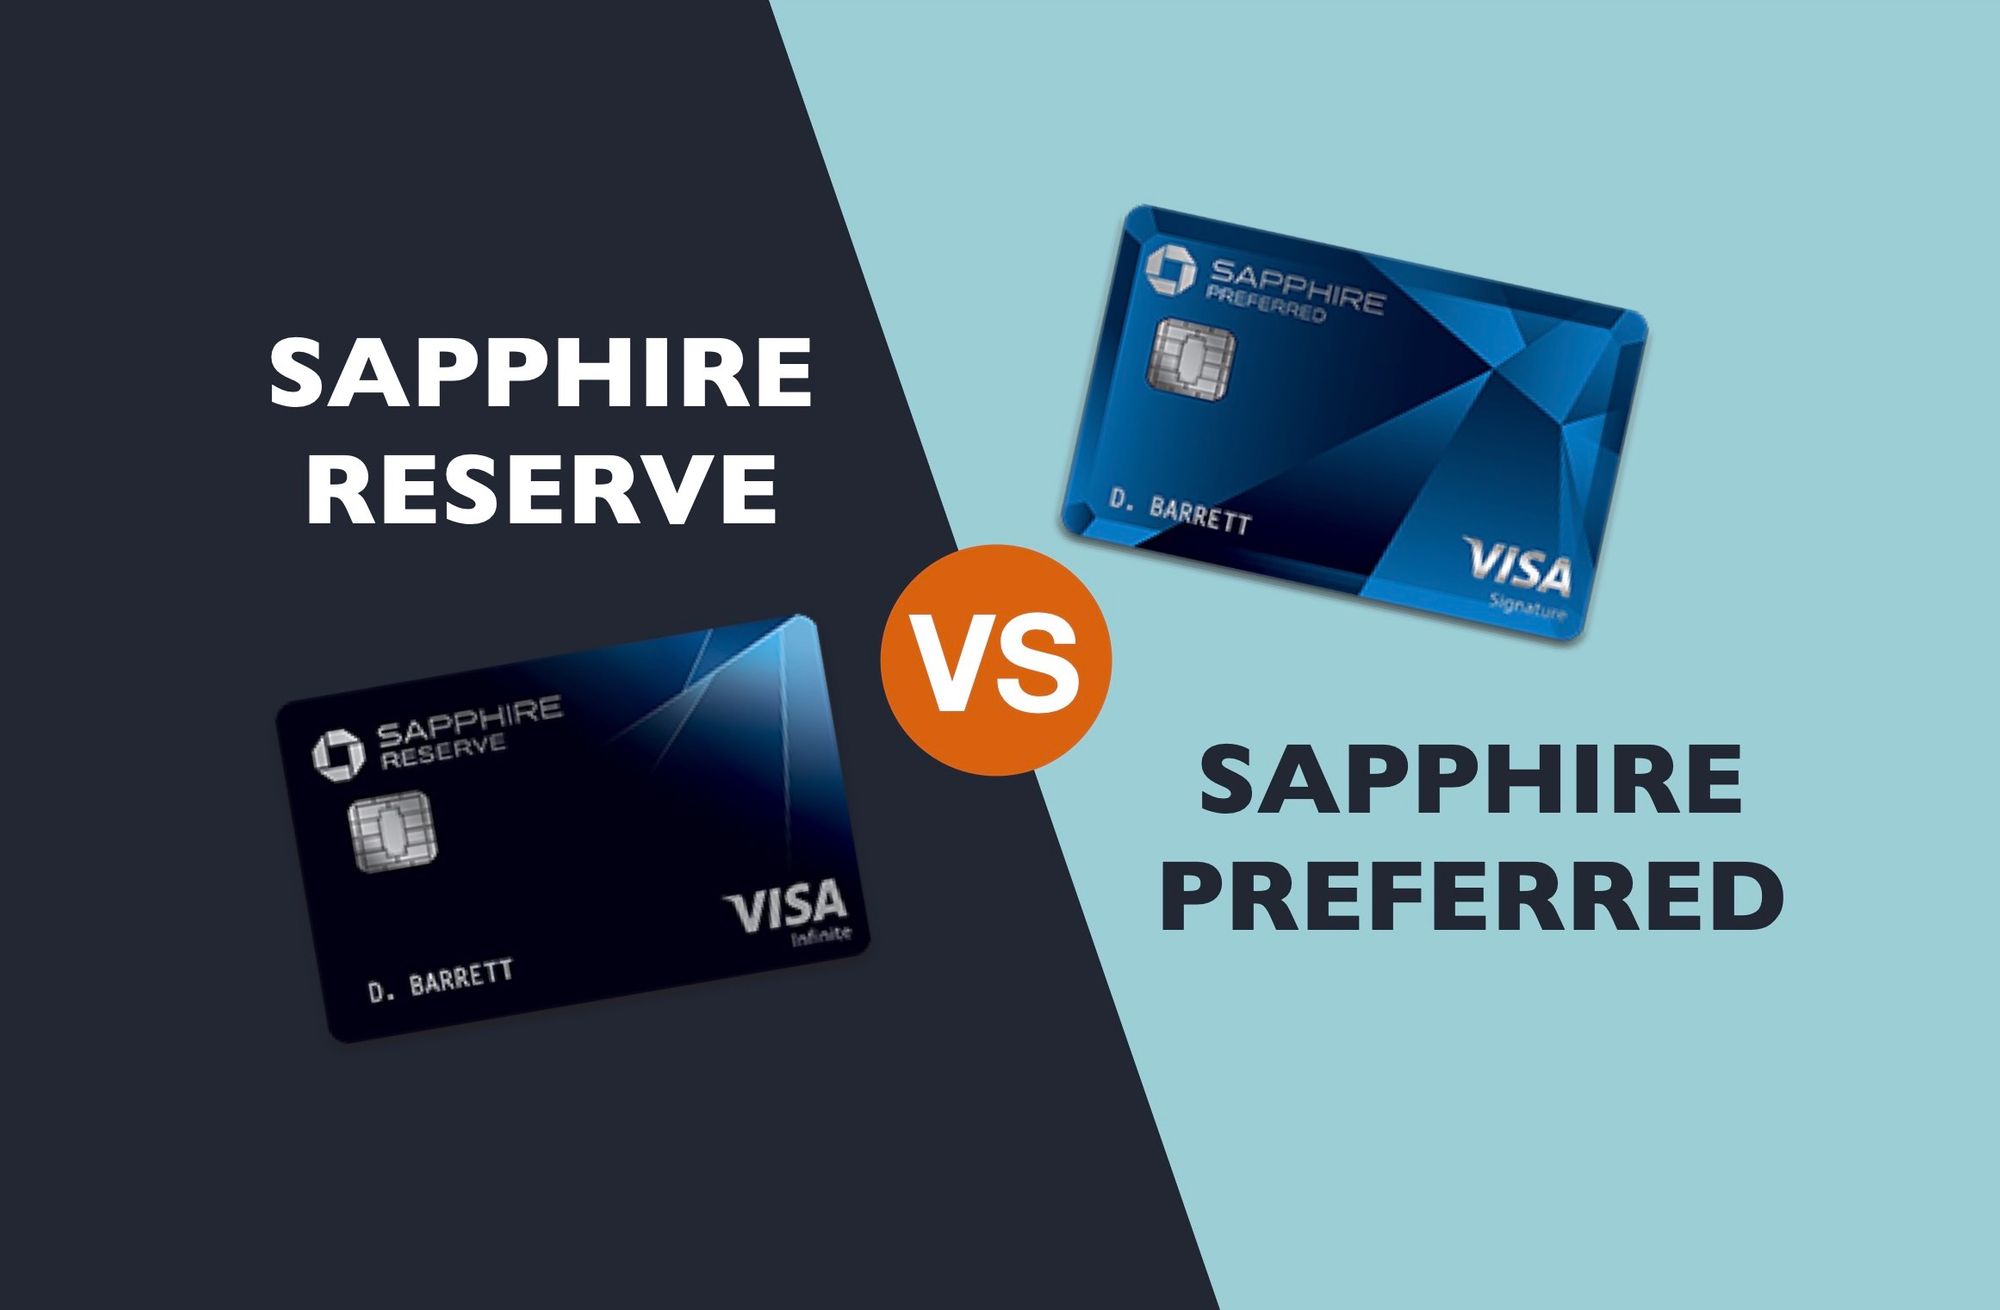 chase sapphire preferred card travel insurance